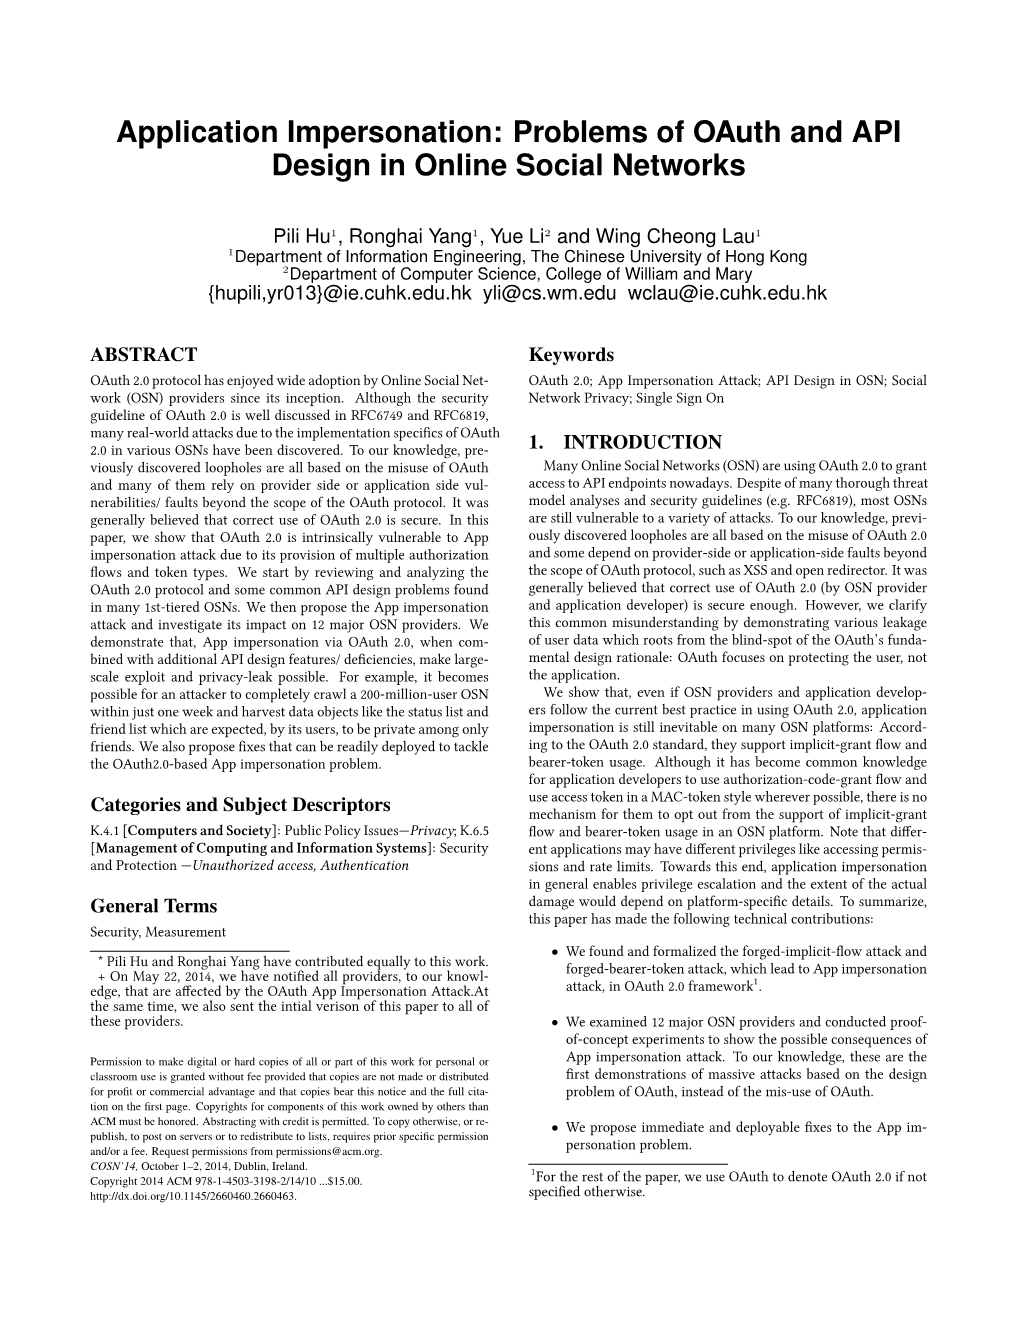 Application Impersonation: Problems of Oauth and API Design in Online Social Networks